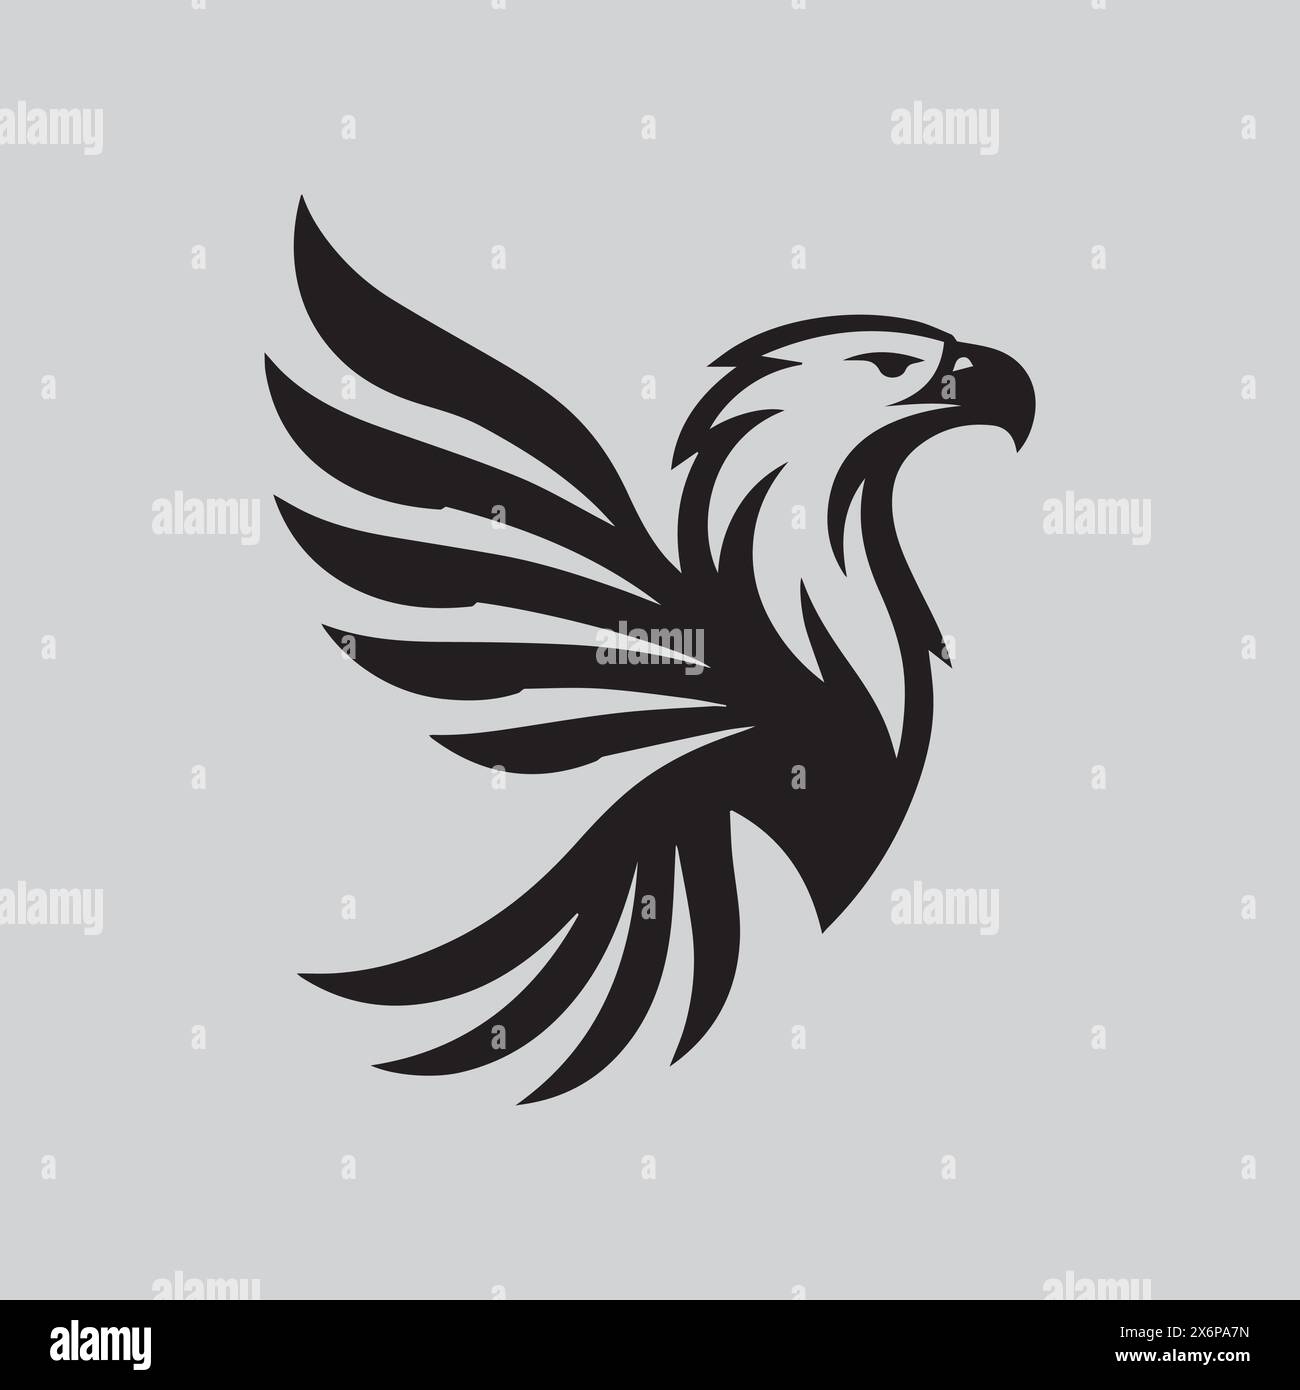 Majestic Eagle Head Logo Design: Elegant and Powerful Symbolism for a Timeless Brand Identity Stock Vector